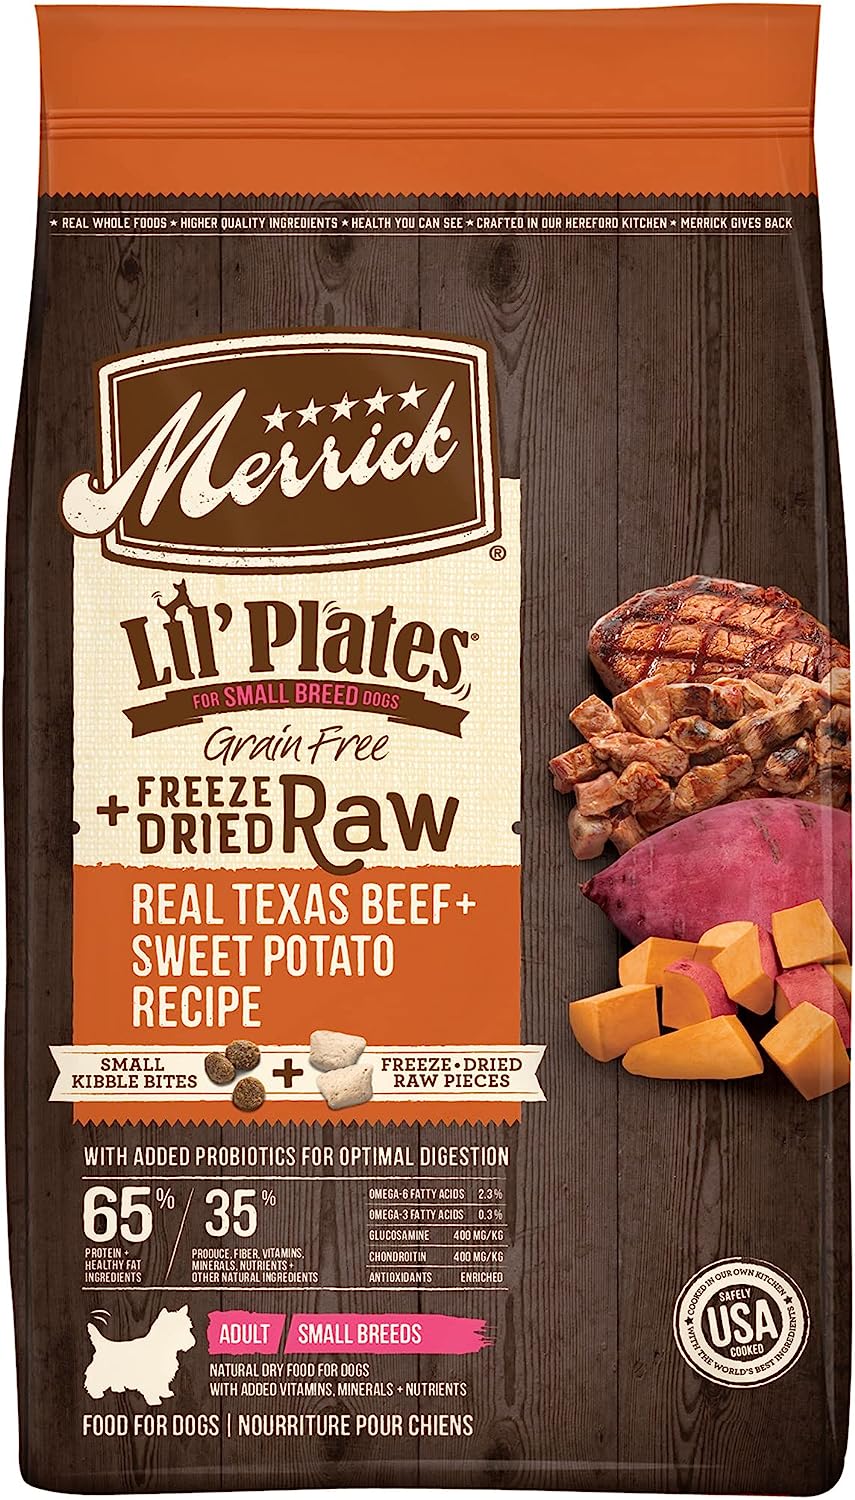 Merrick Lil’ Plates Grain-Free Real Texas Beef + Sweet Potato with Raw Bites Recipe Dry Dog Food – Gallery Image 1